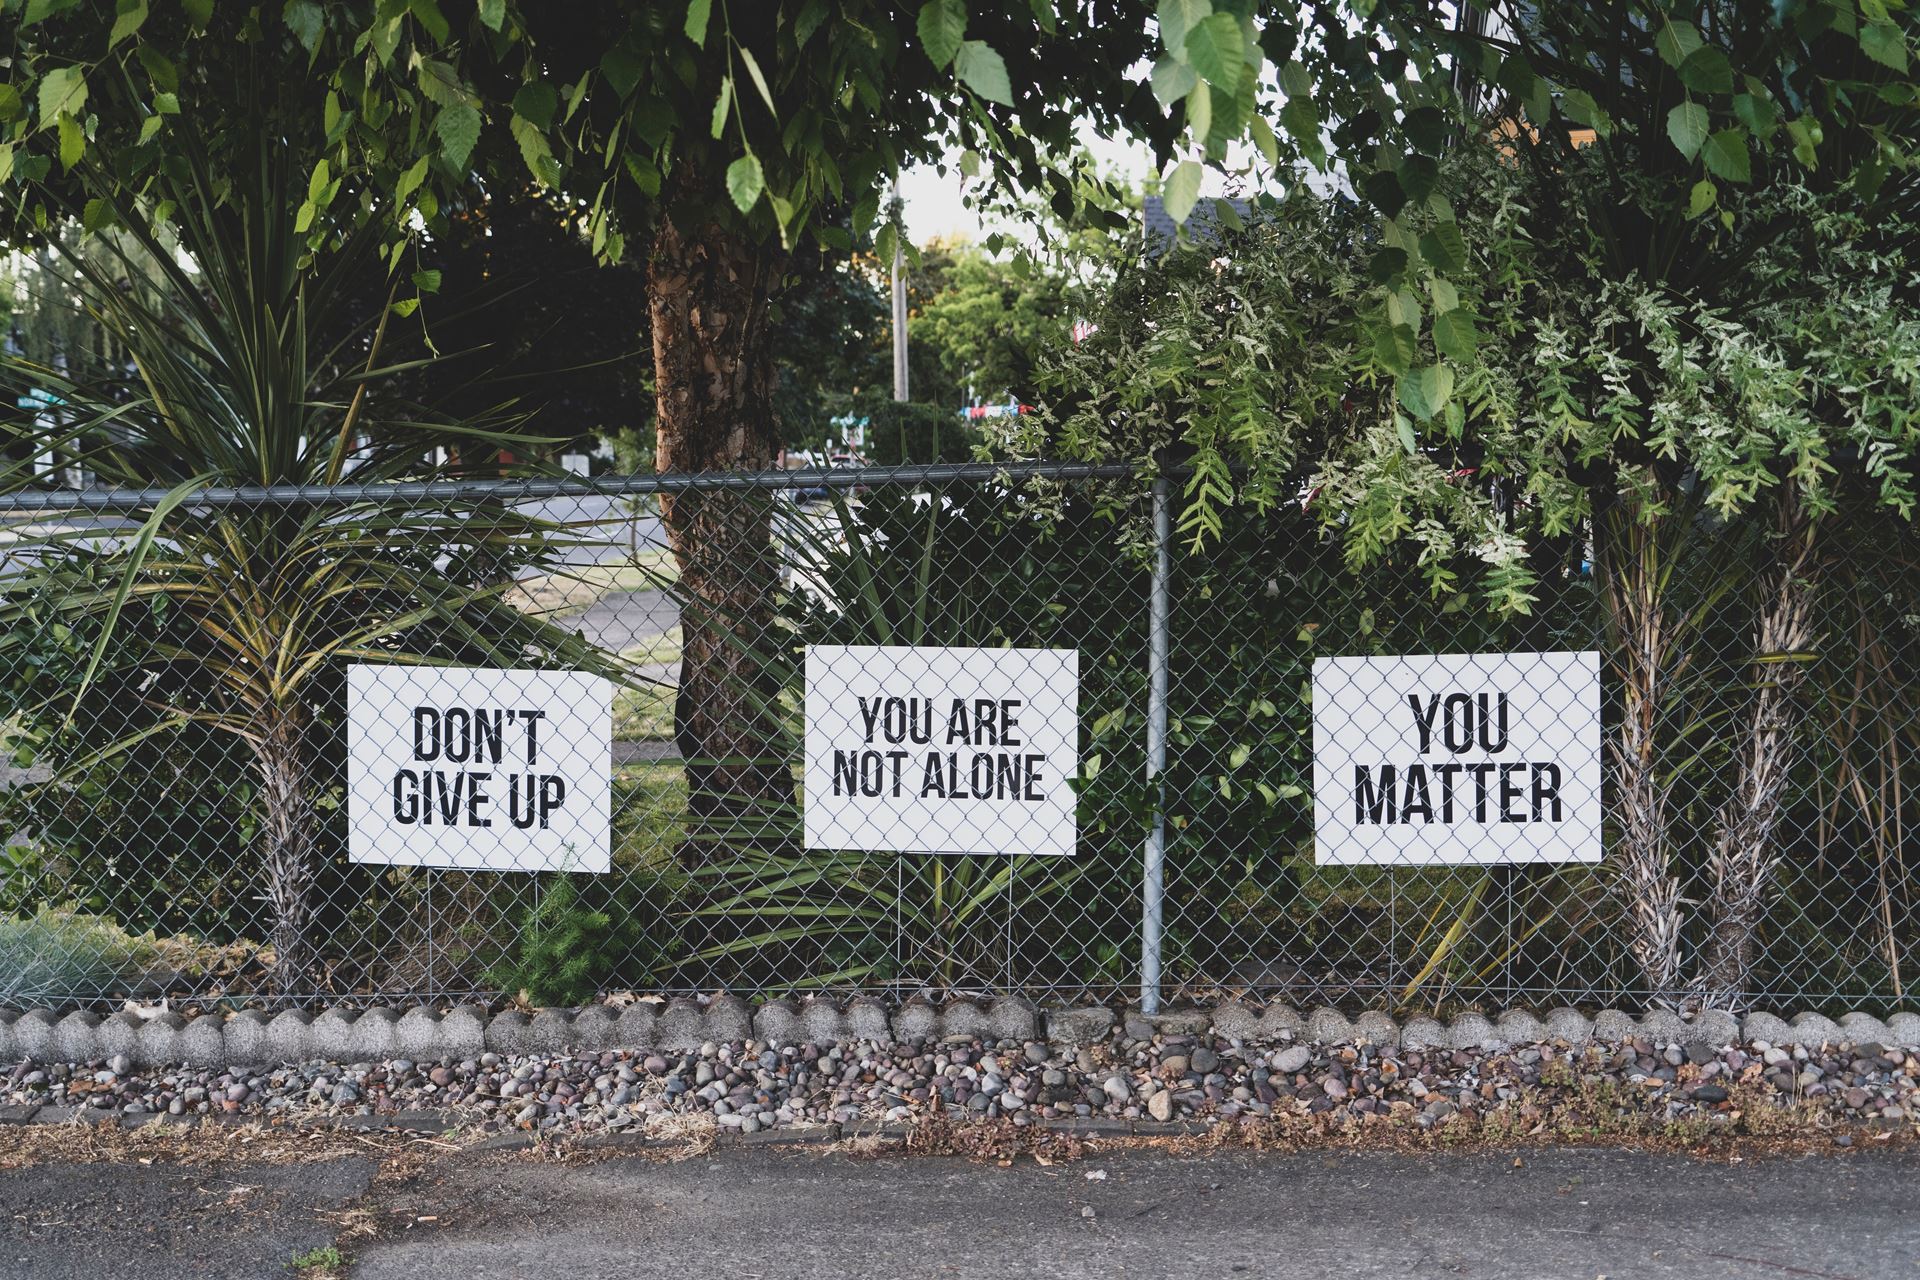 3 signs read Don't give up, you are not alone, you matter